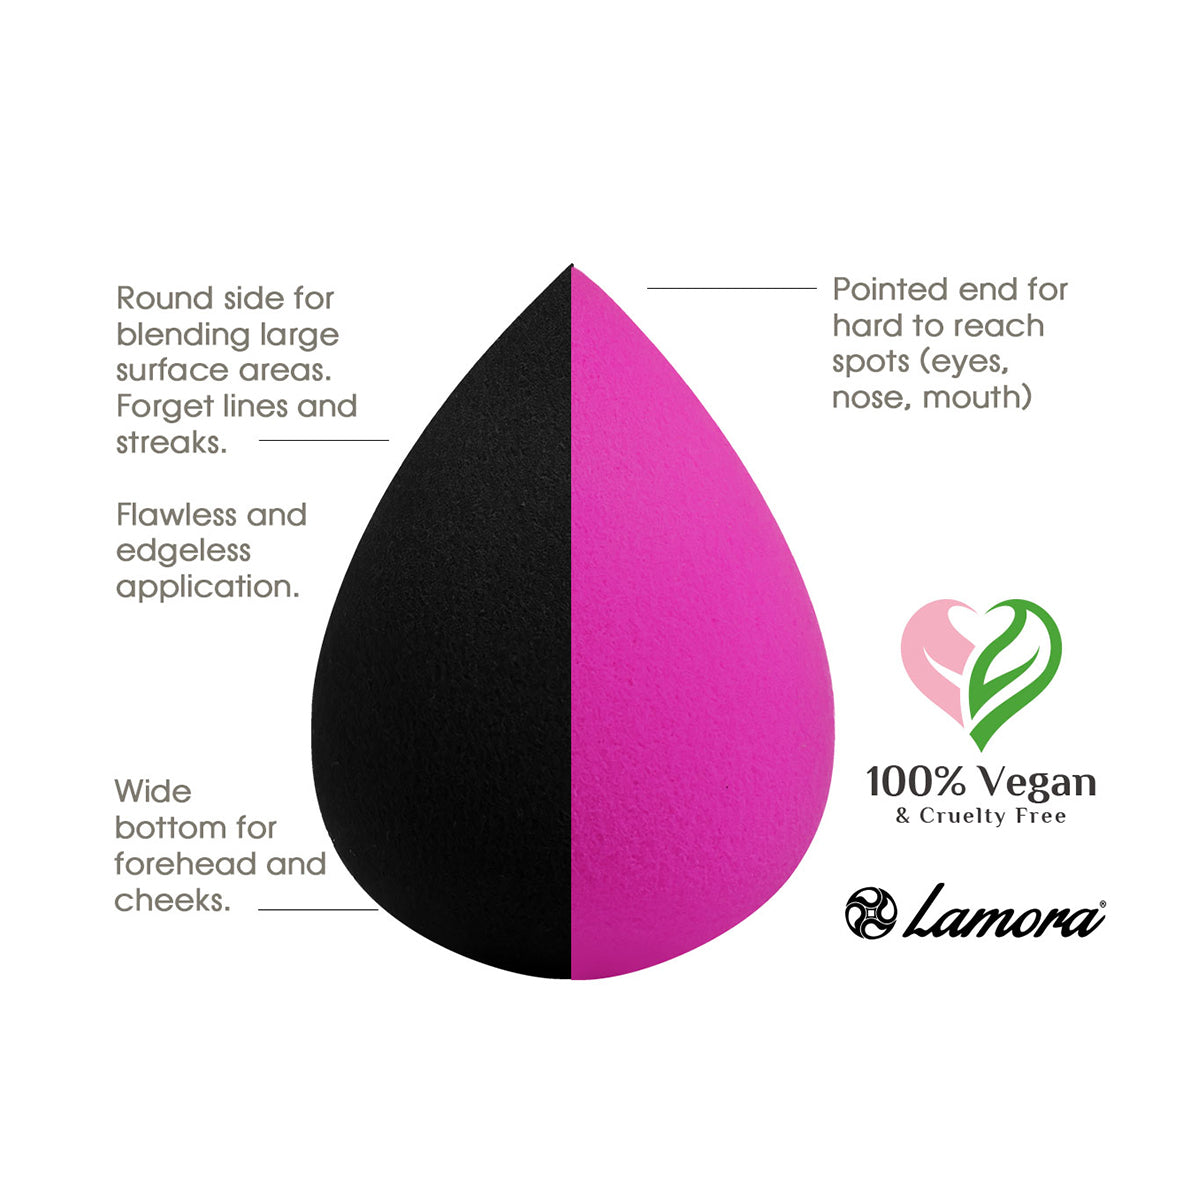 What makes a good traditional makeup blending sponge from Lamora Beauty